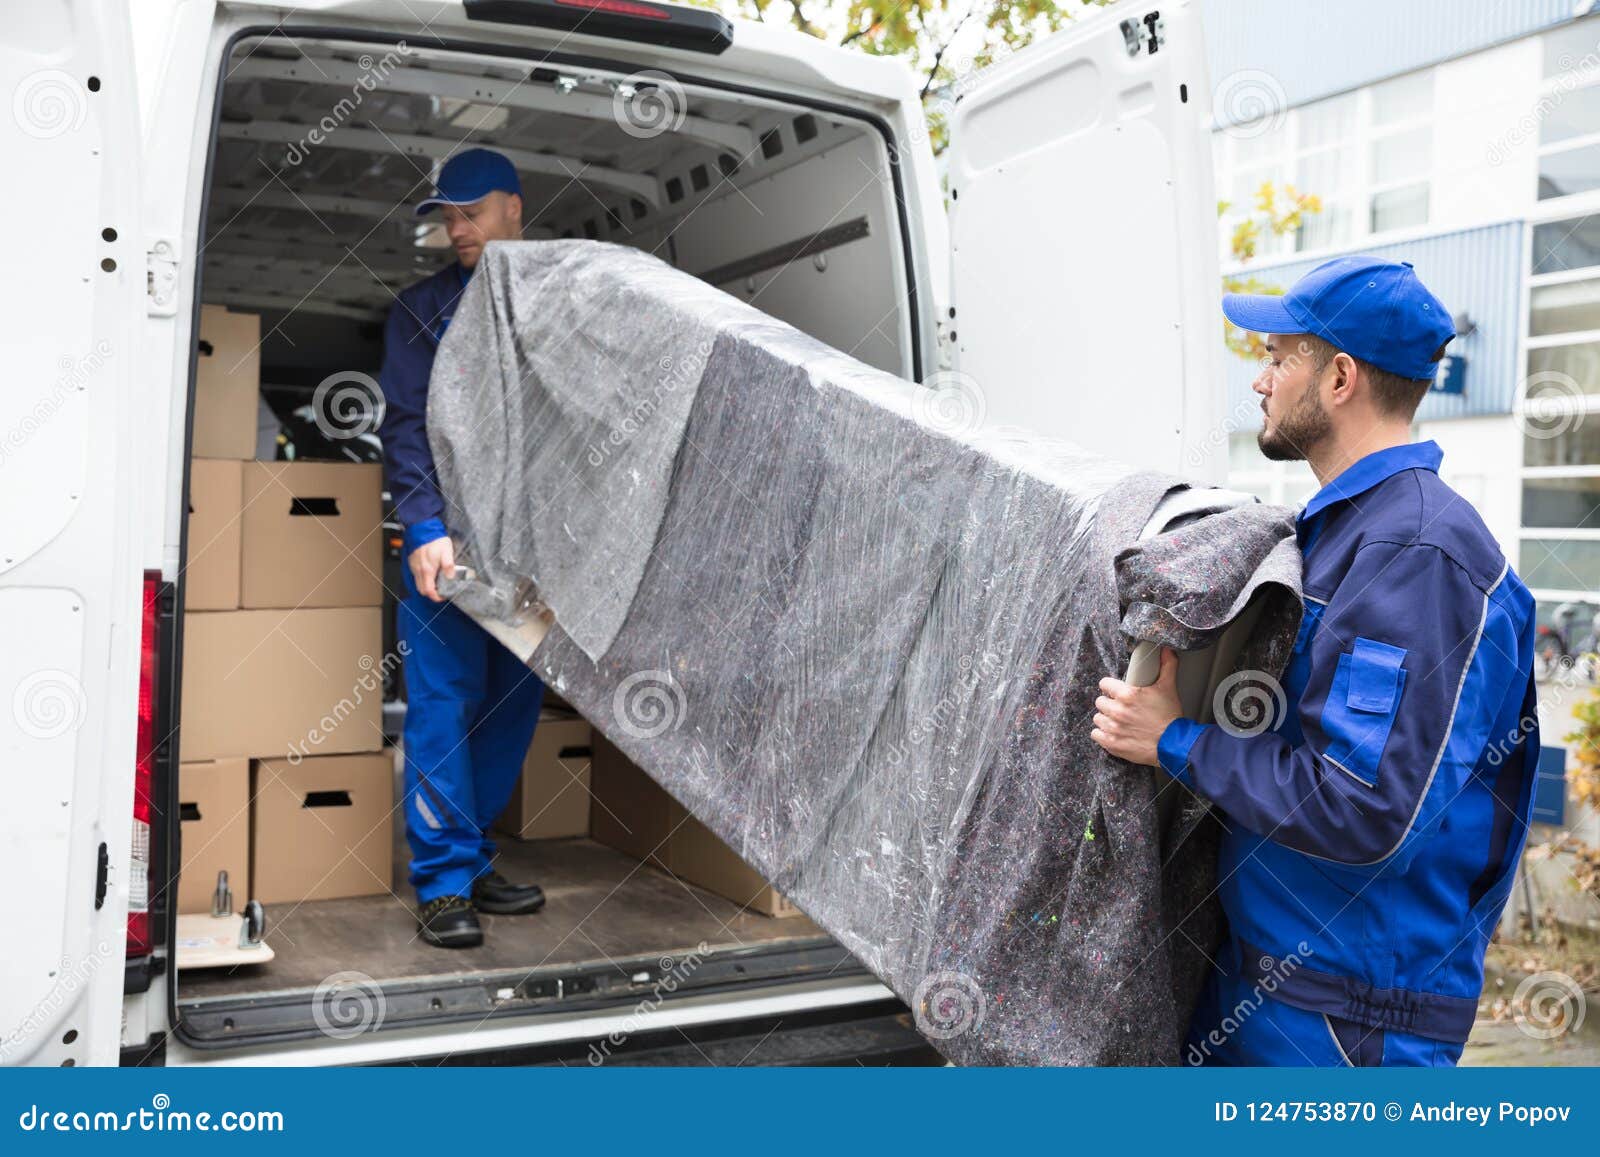 two delivery men unloading furniture from vehicle